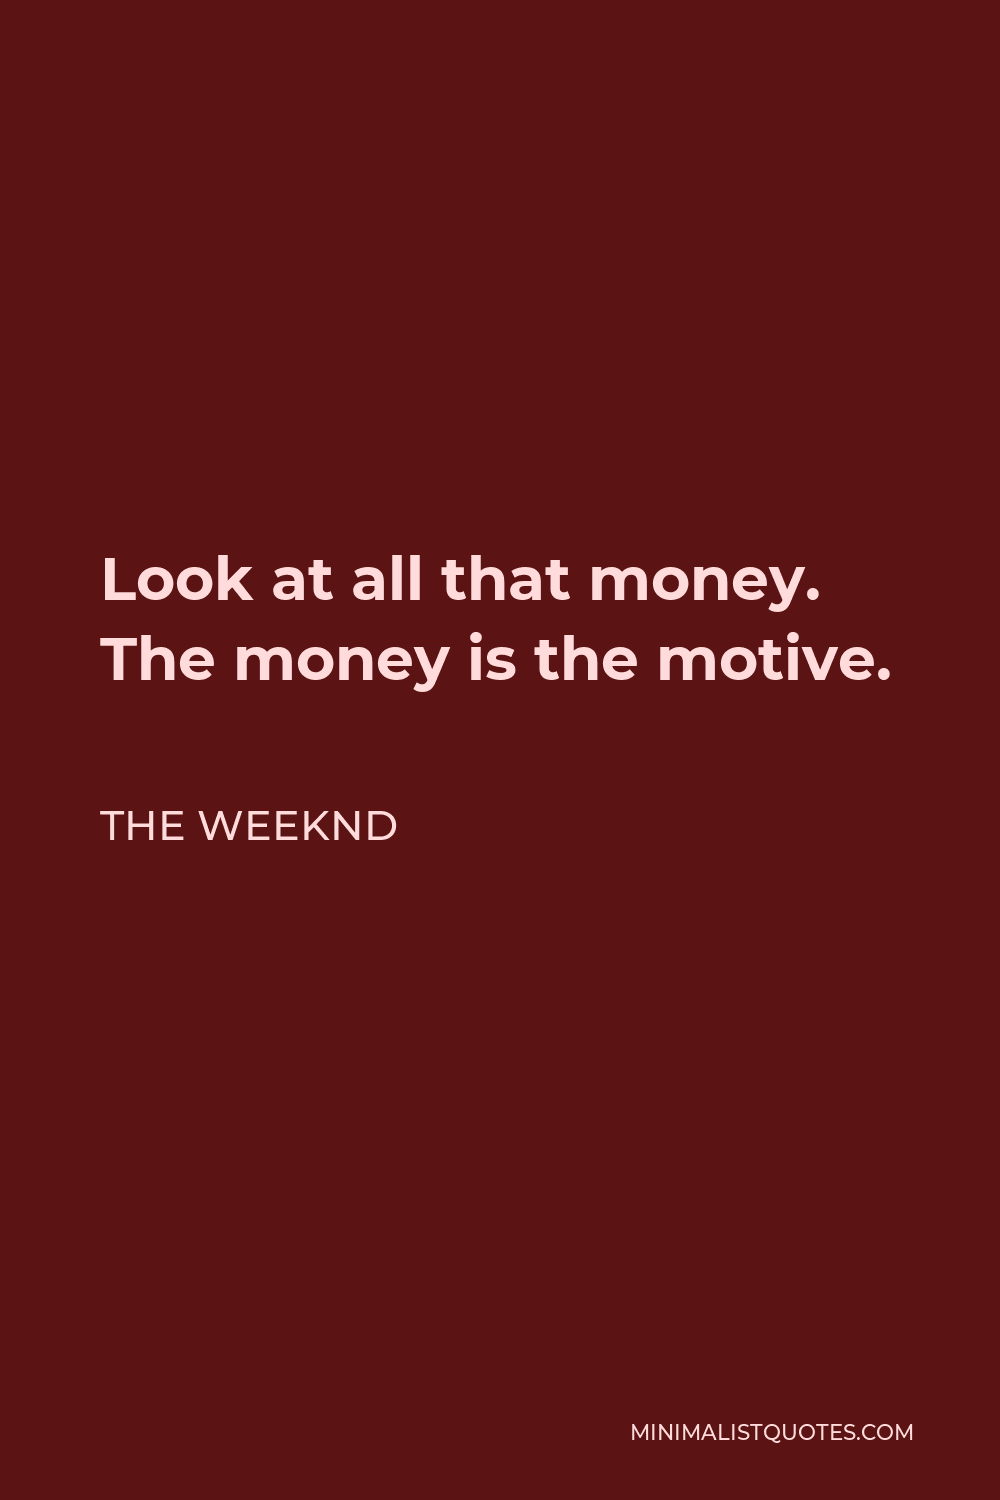 The Weeknd Quote - Look at all that money. The money is the motive.